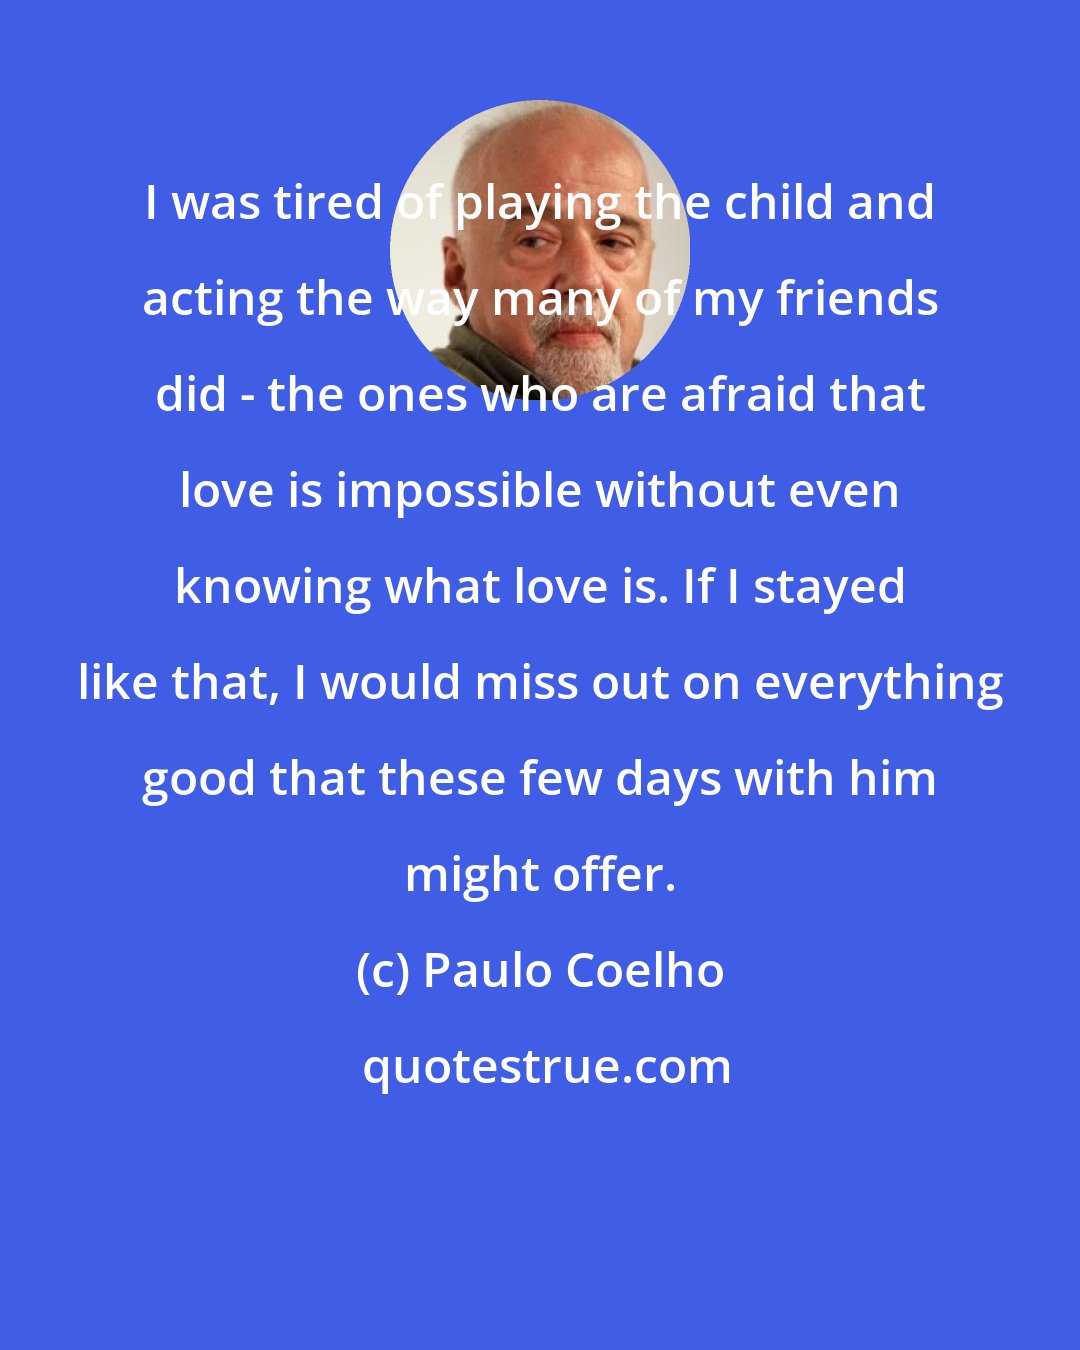 Paulo Coelho: I was tired of playing the child and acting the way many of my friends did - the ones who are afraid that love is impossible without even knowing what love is. If I stayed like that, I would miss out on everything good that these few days with him might offer.